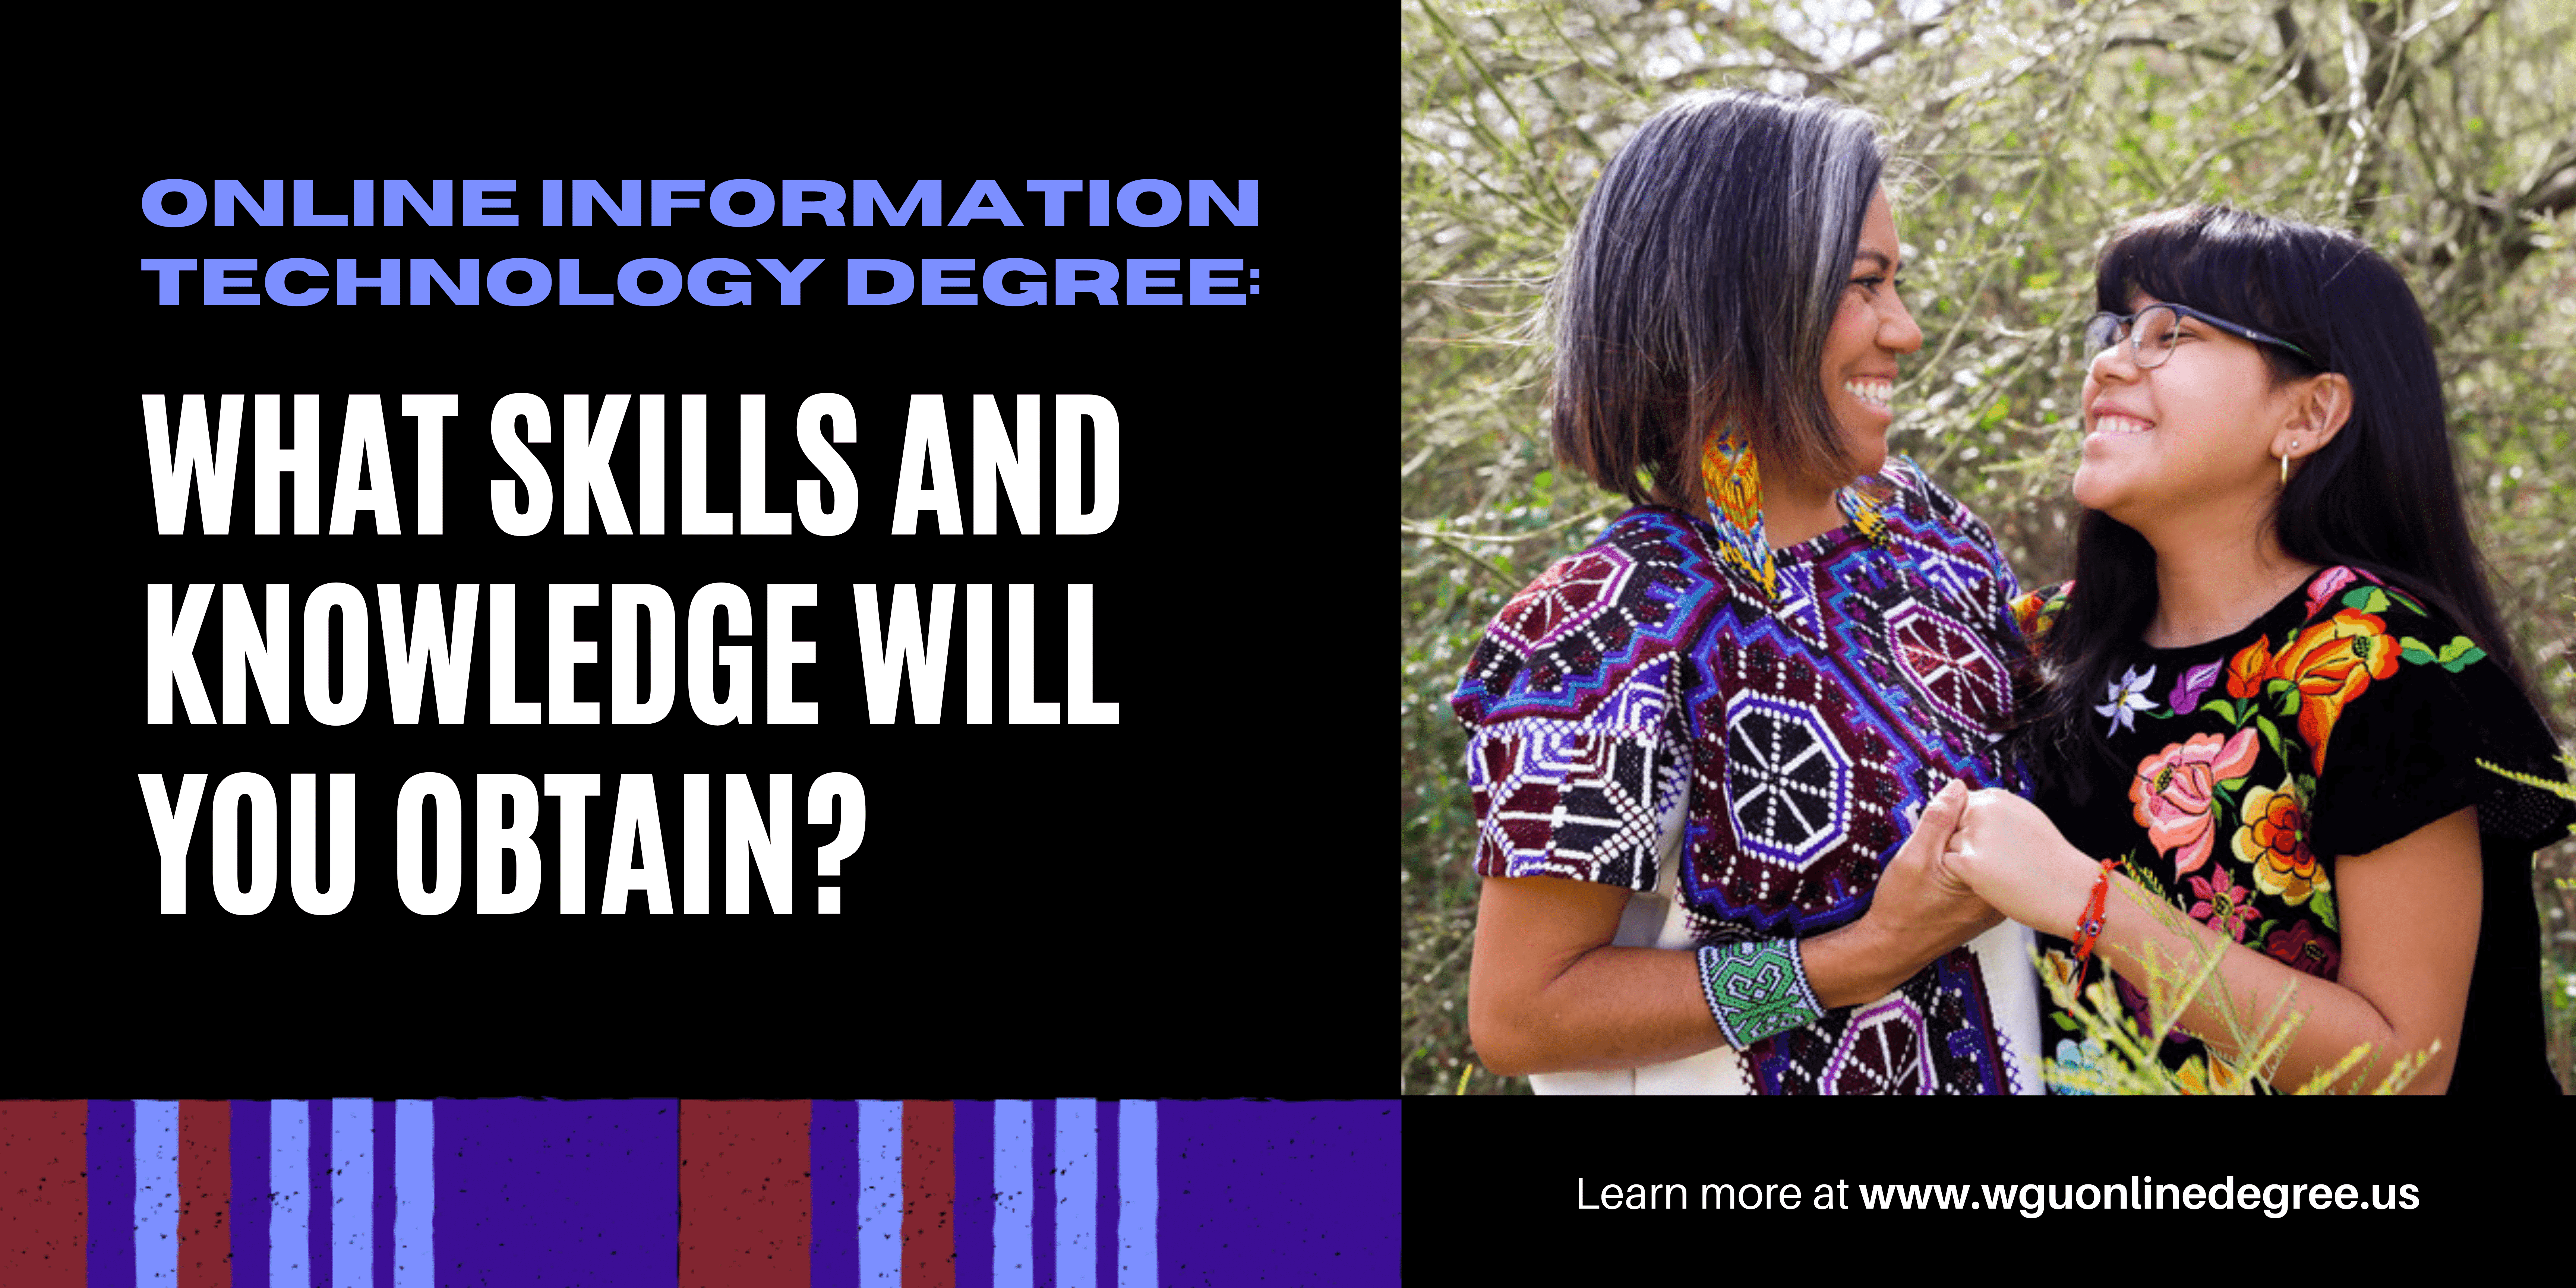 Online Information Technology Degree: What Skills and Knowledge Will You Obtain?